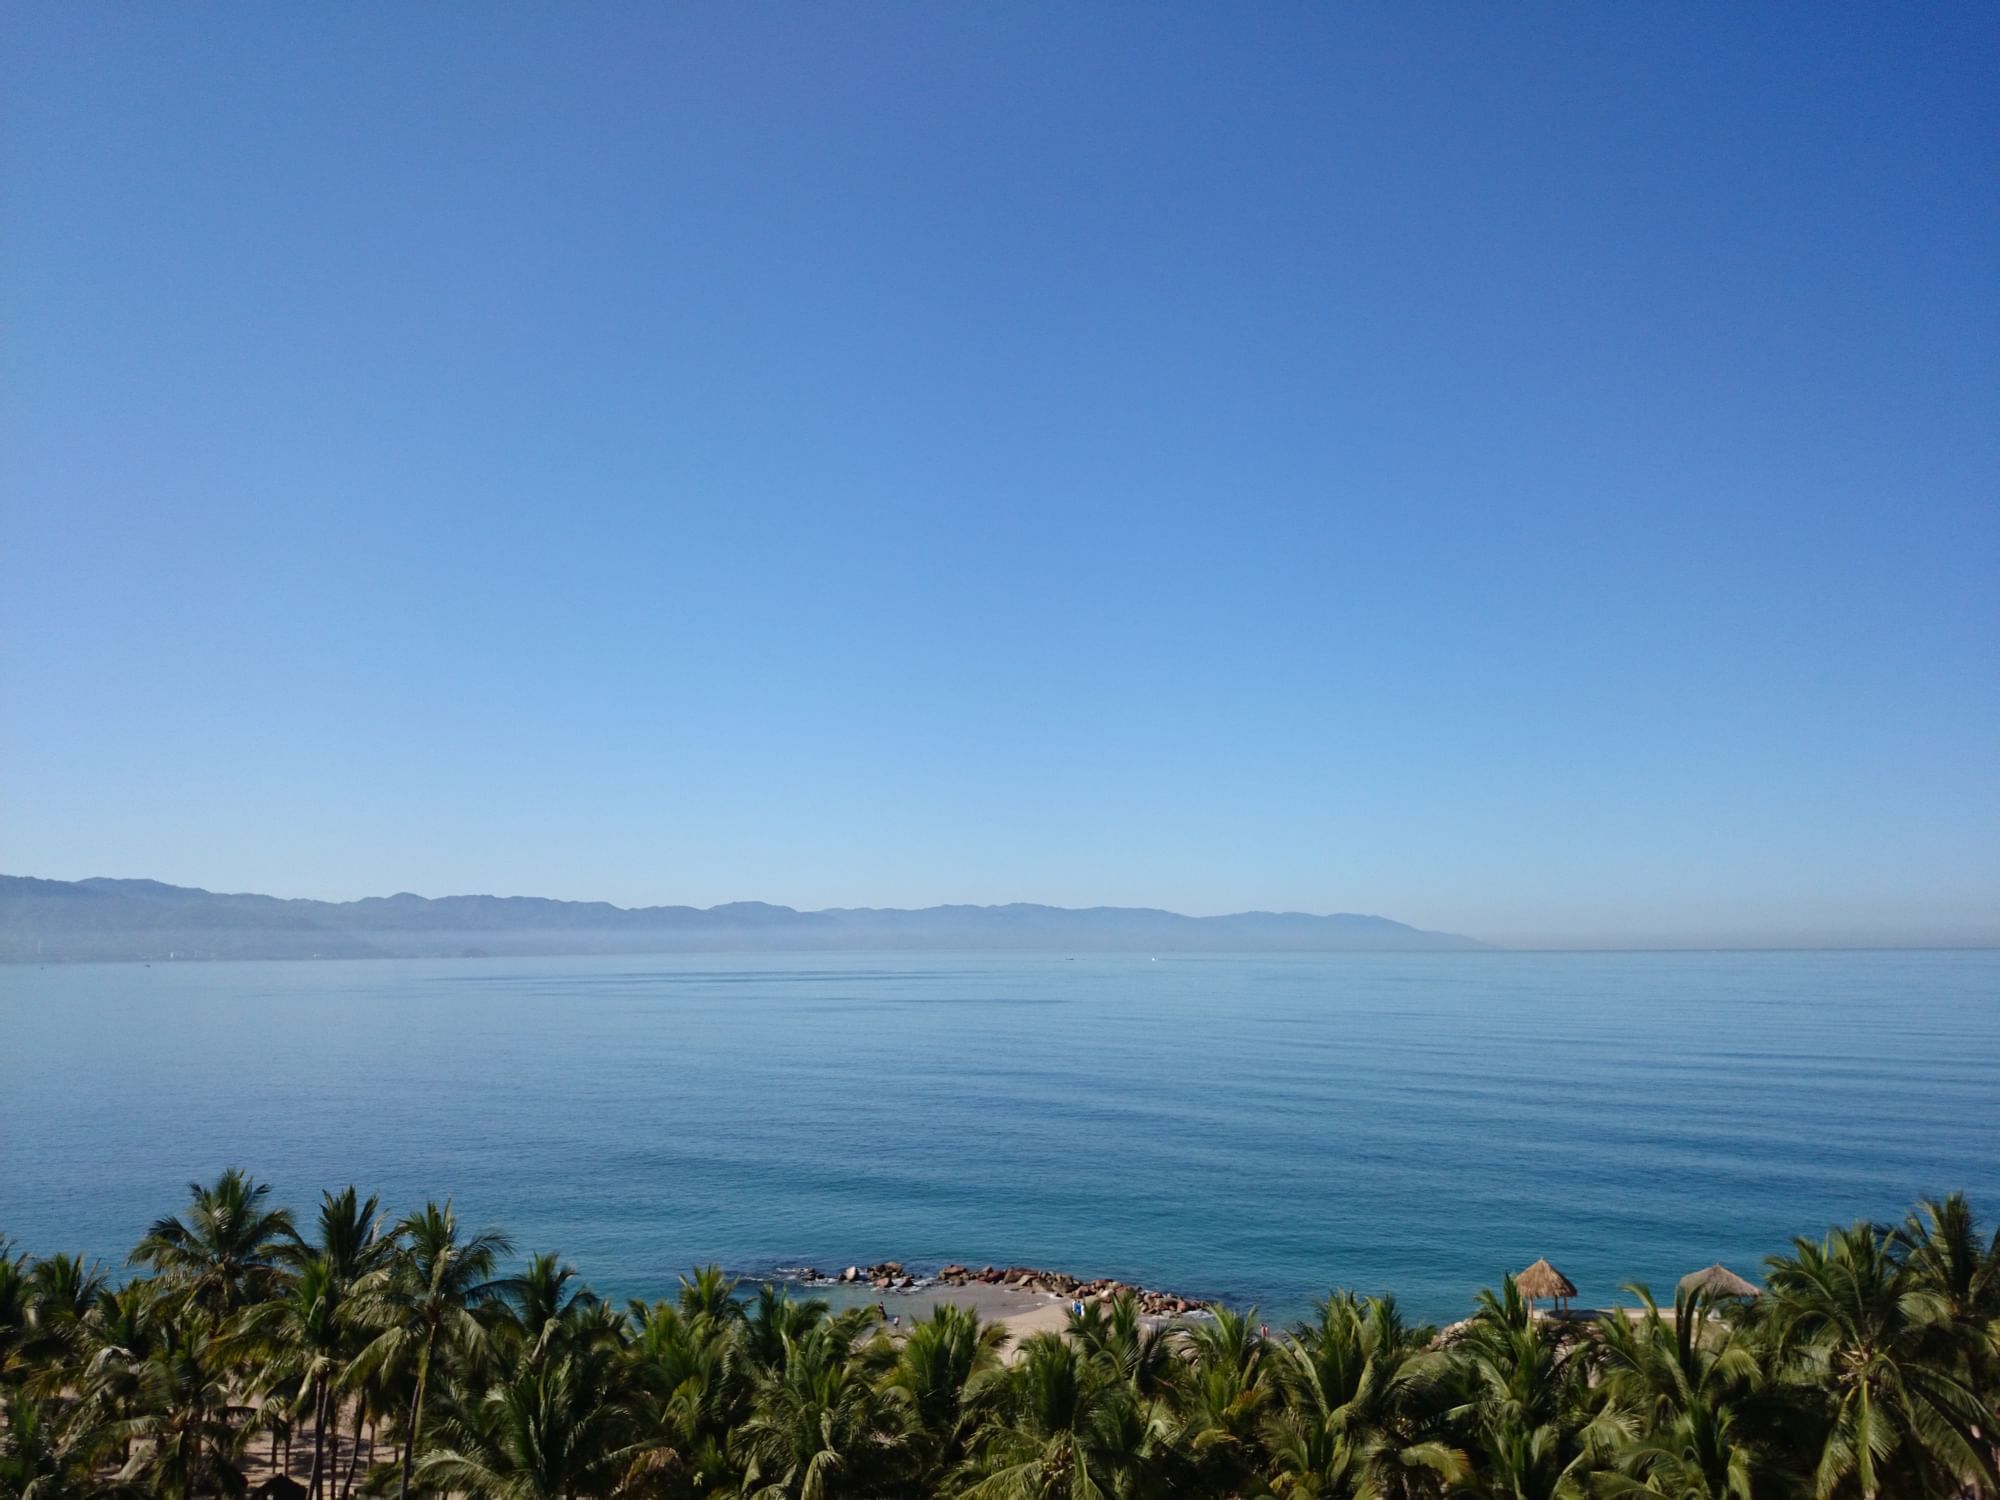 A view of the ocean from Puerto Vallarta city